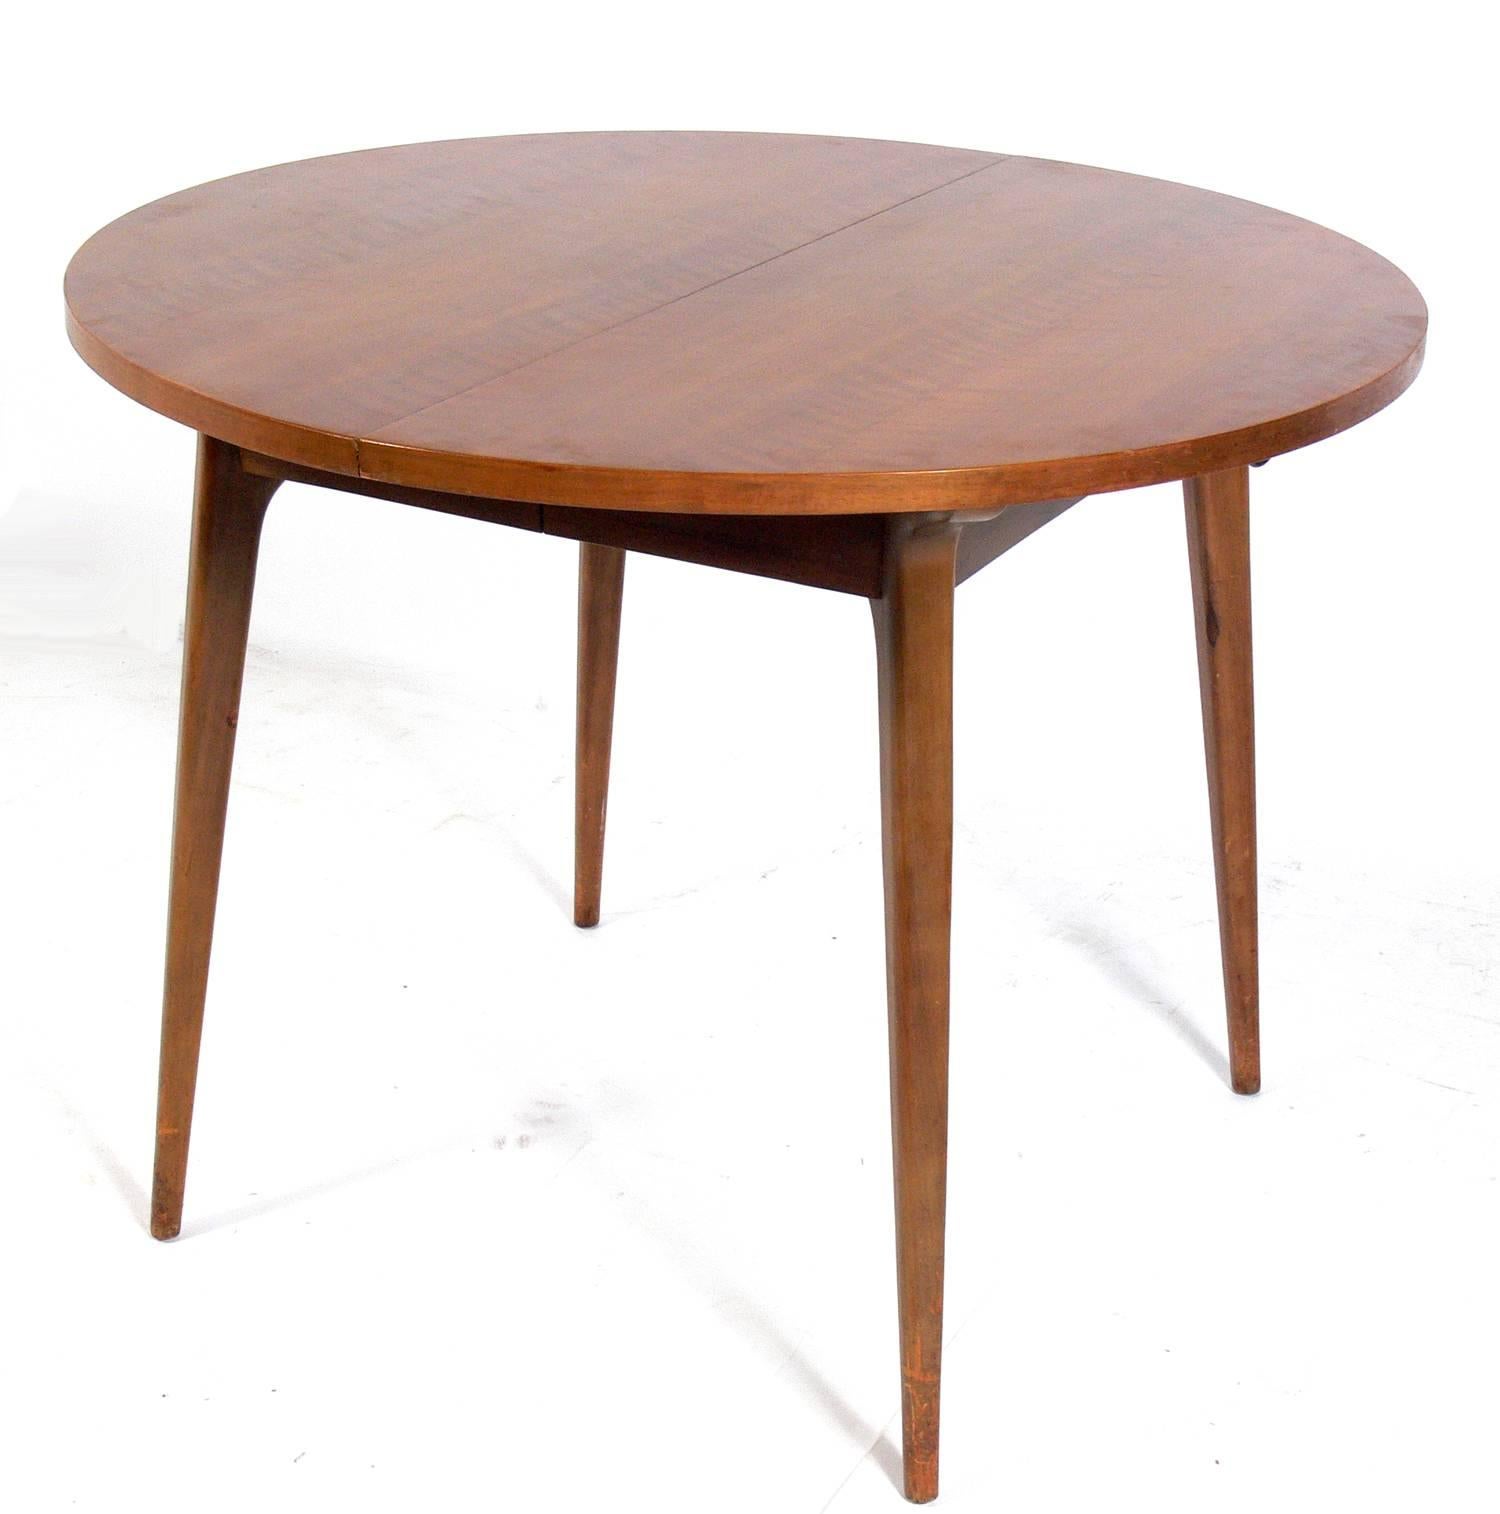 Italian modern dining table, designed by Bertha Schaefer for Singer and Sons, Italy, circa 1950s. Schaefer designed this line for Singer and Sons with his contemporaries Gio Ponti, Carlo de Carli, and Franco Albini. The table measures an impressive